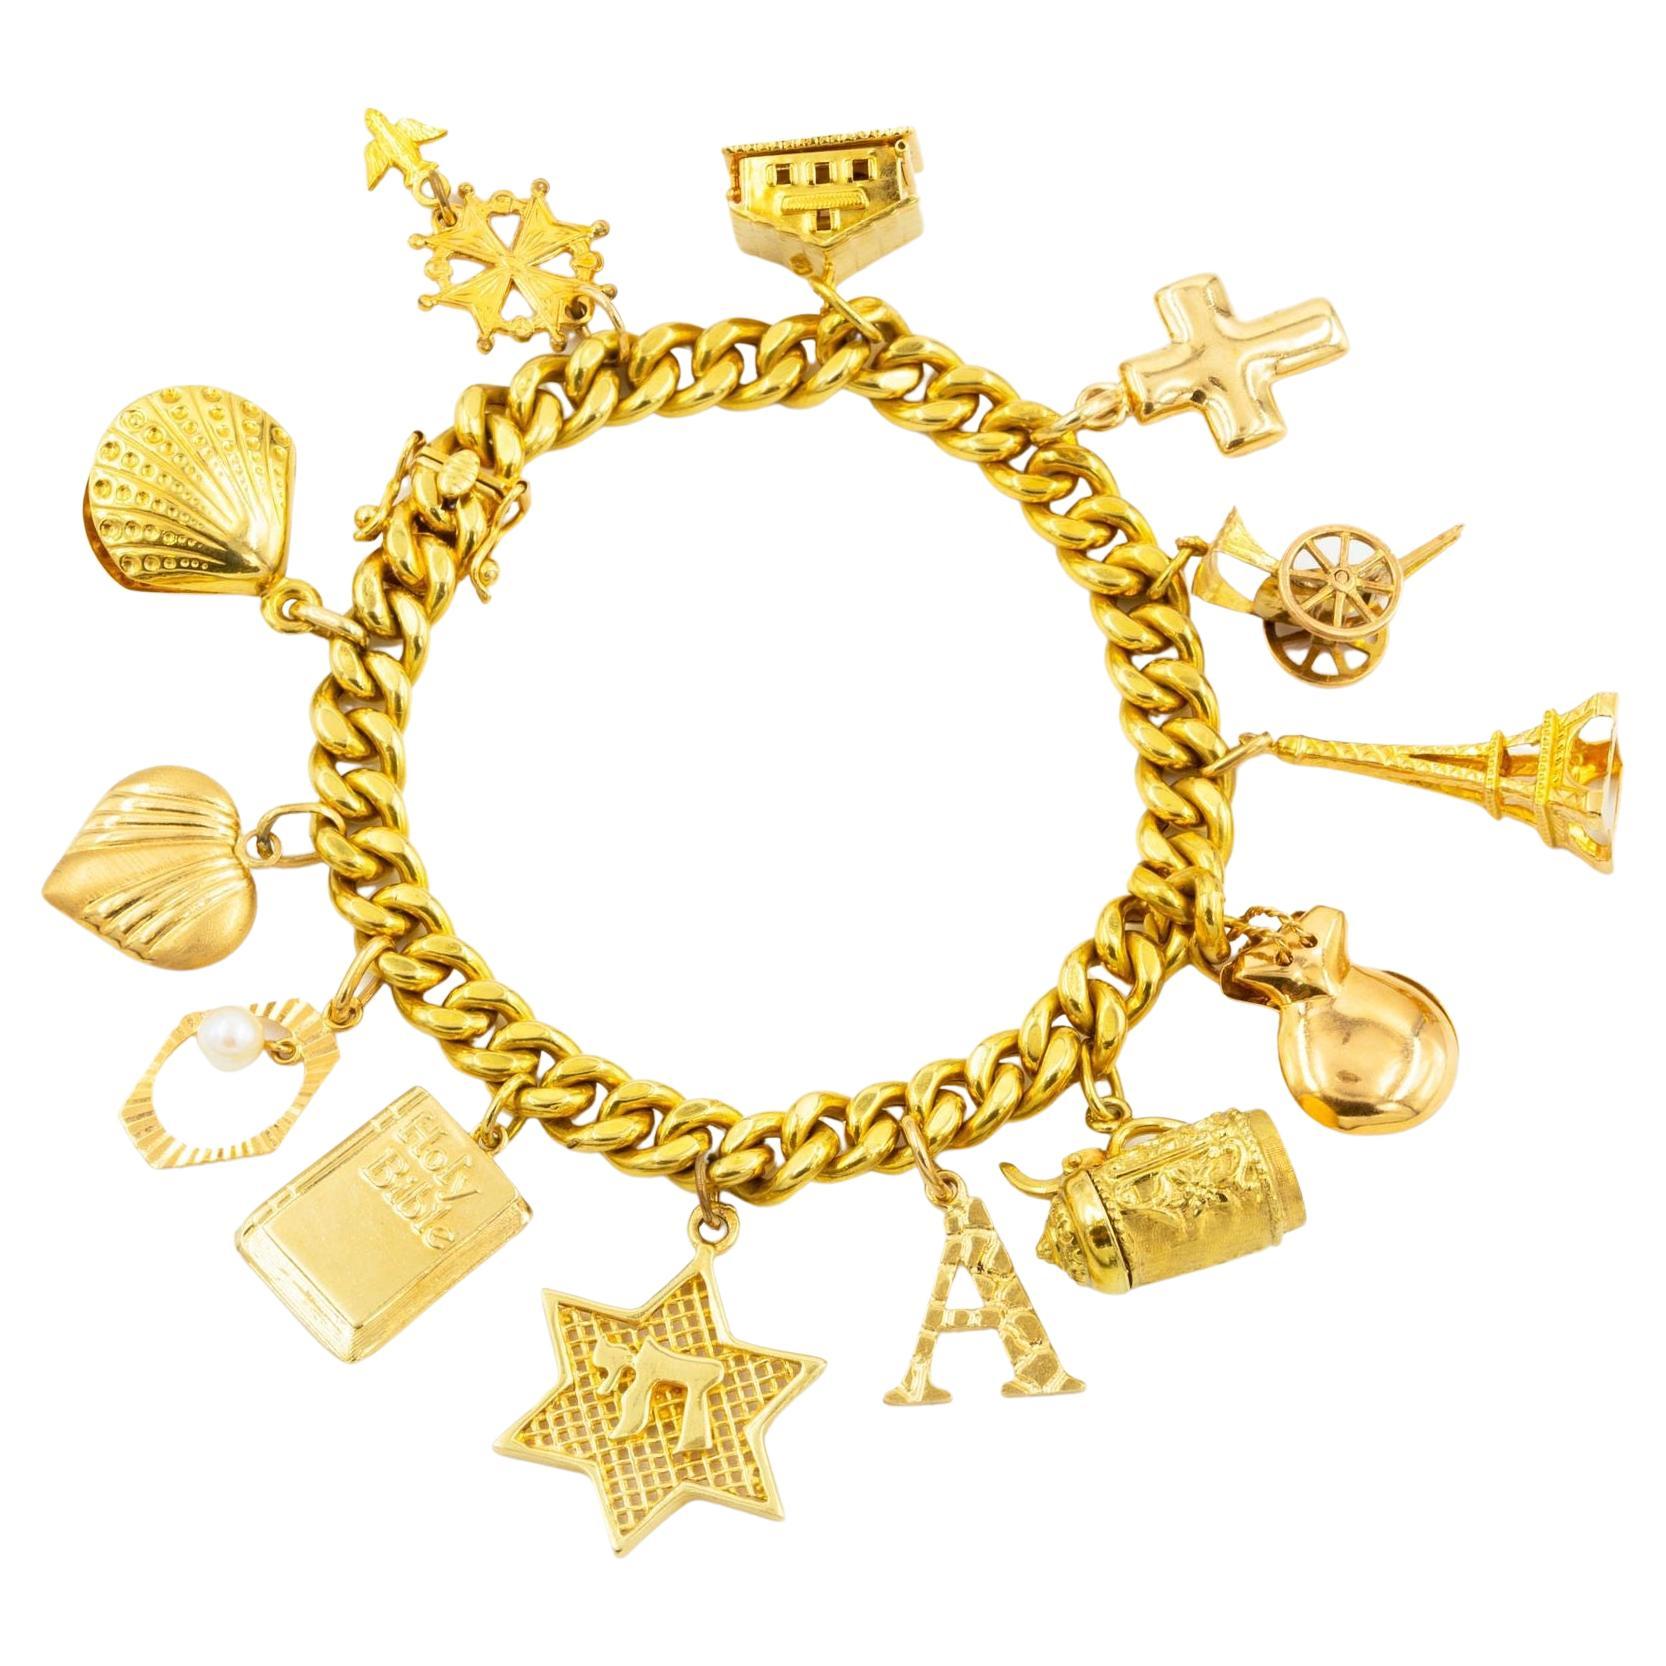 Vintage Italian 18k Gold Bracelet with 14k Gold Charms by Uno-a-Erre